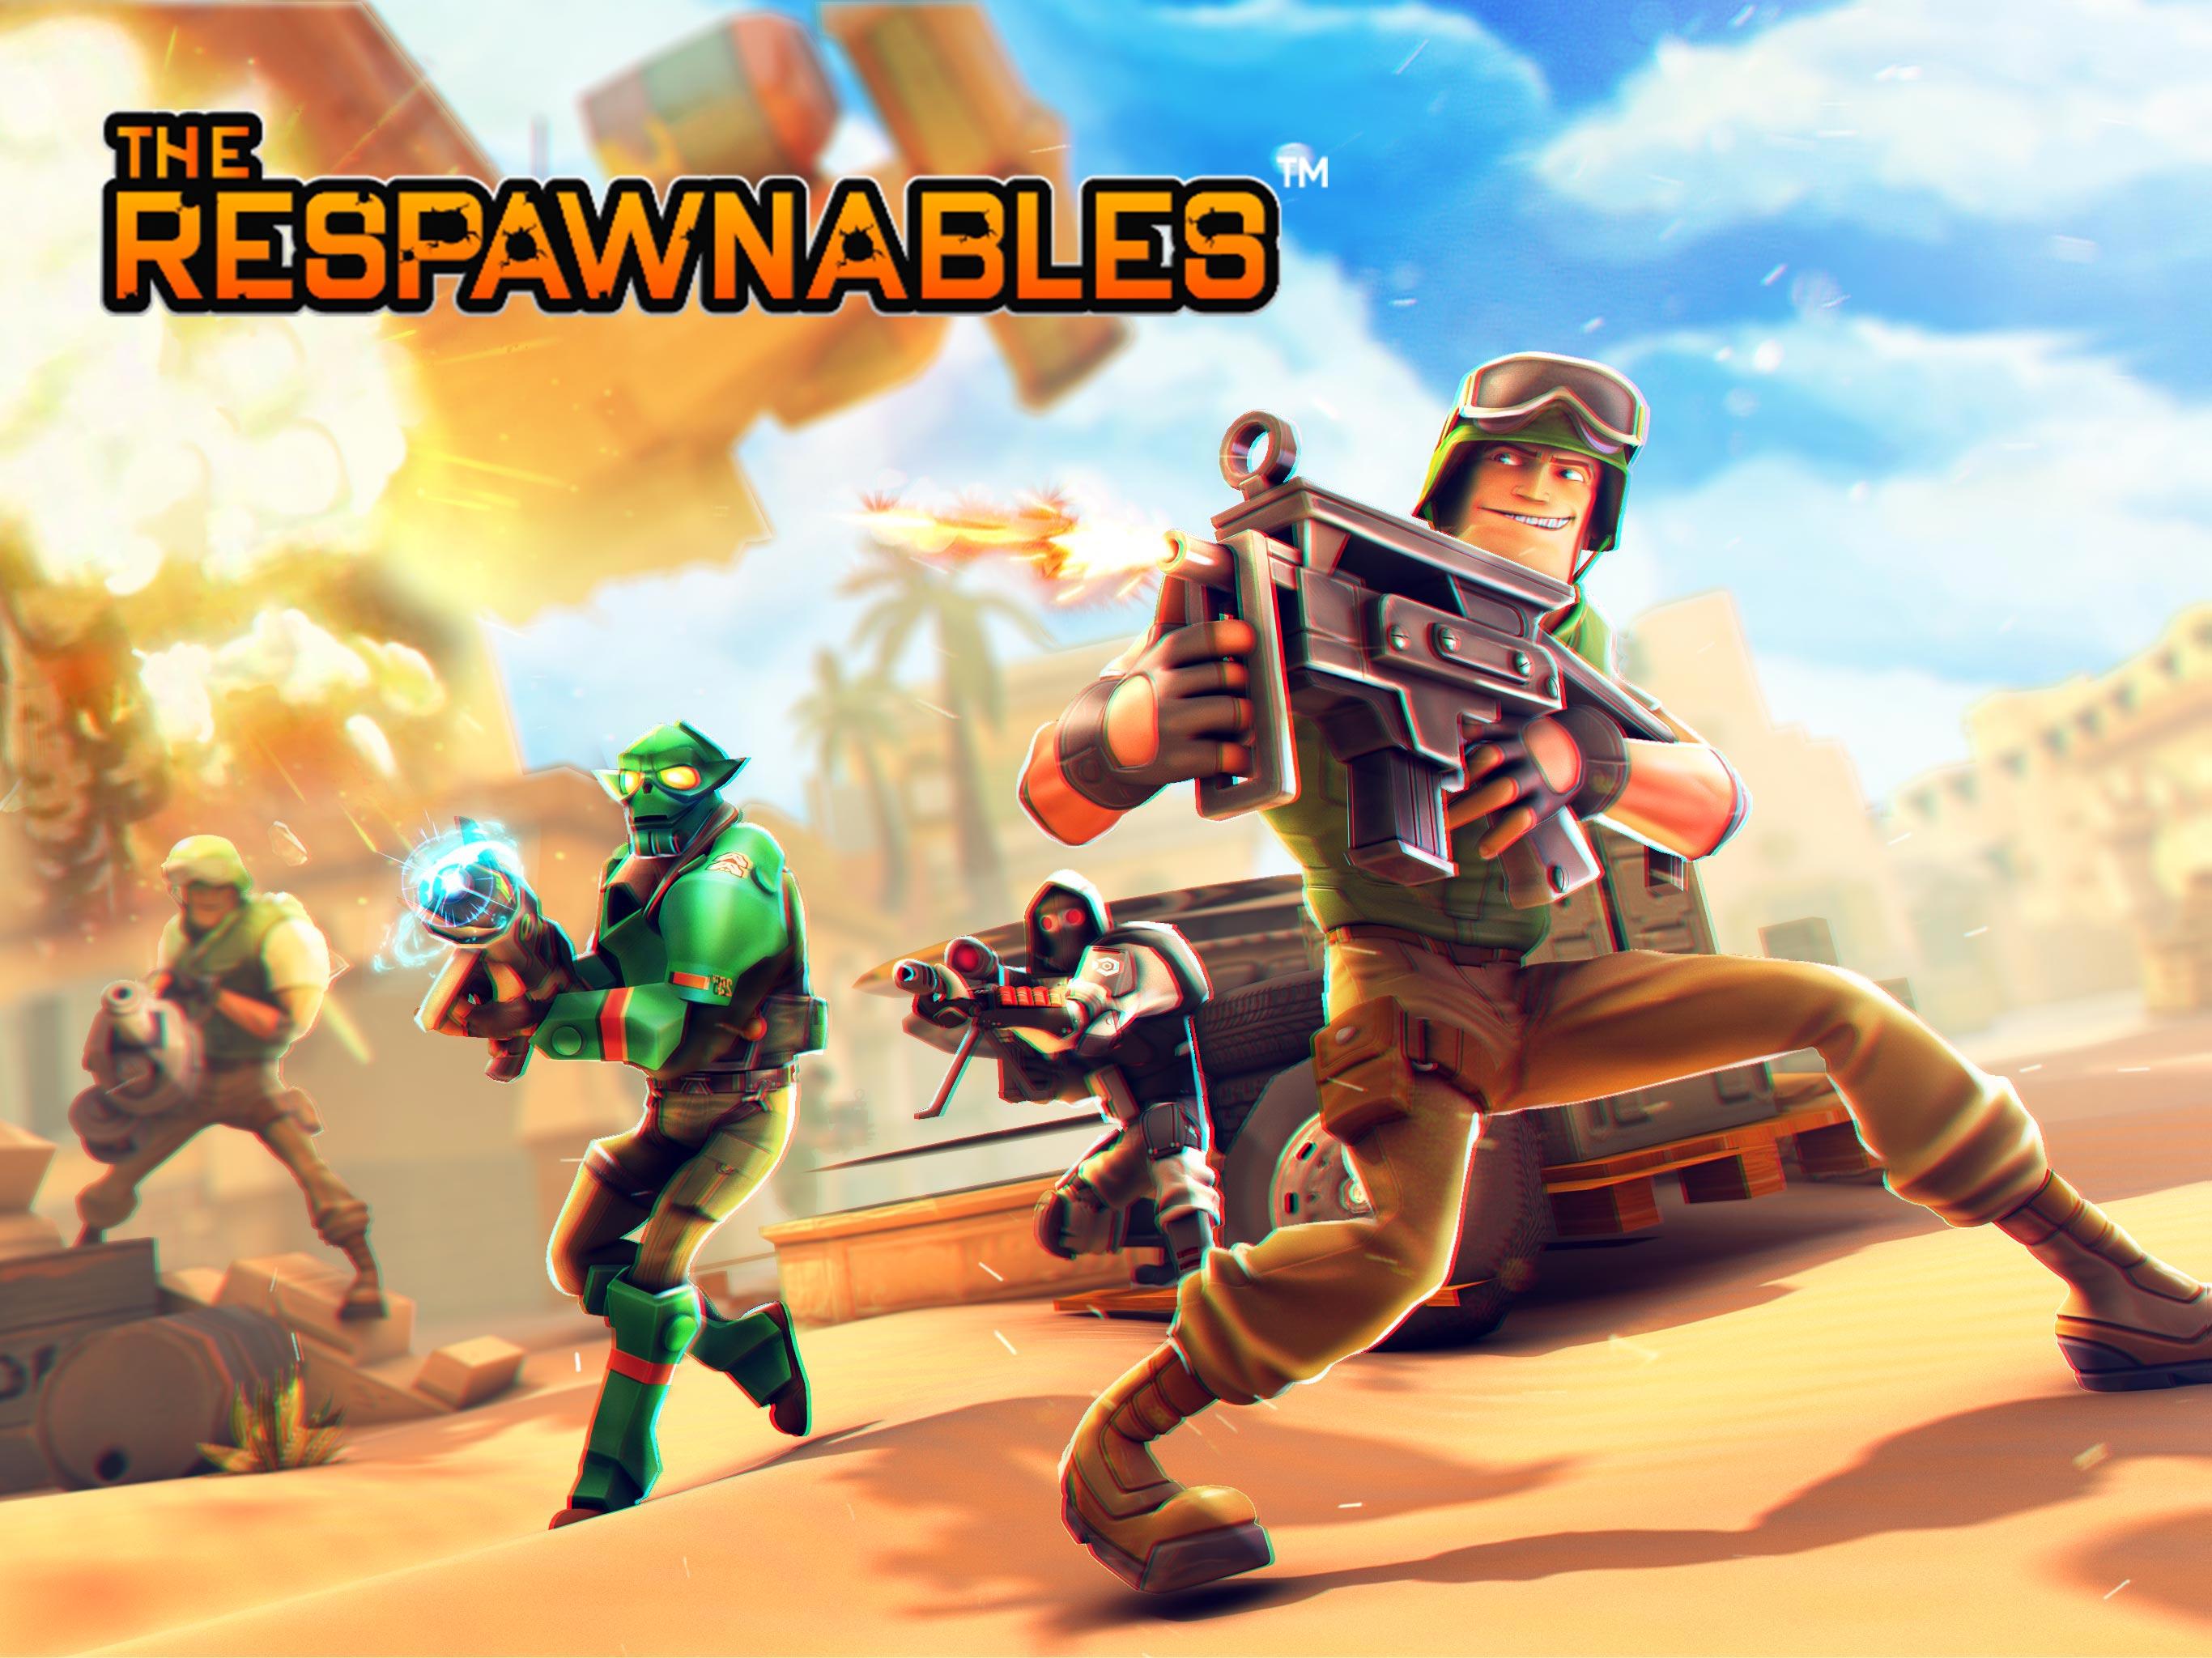 Respawnables for Android - APK Download - 